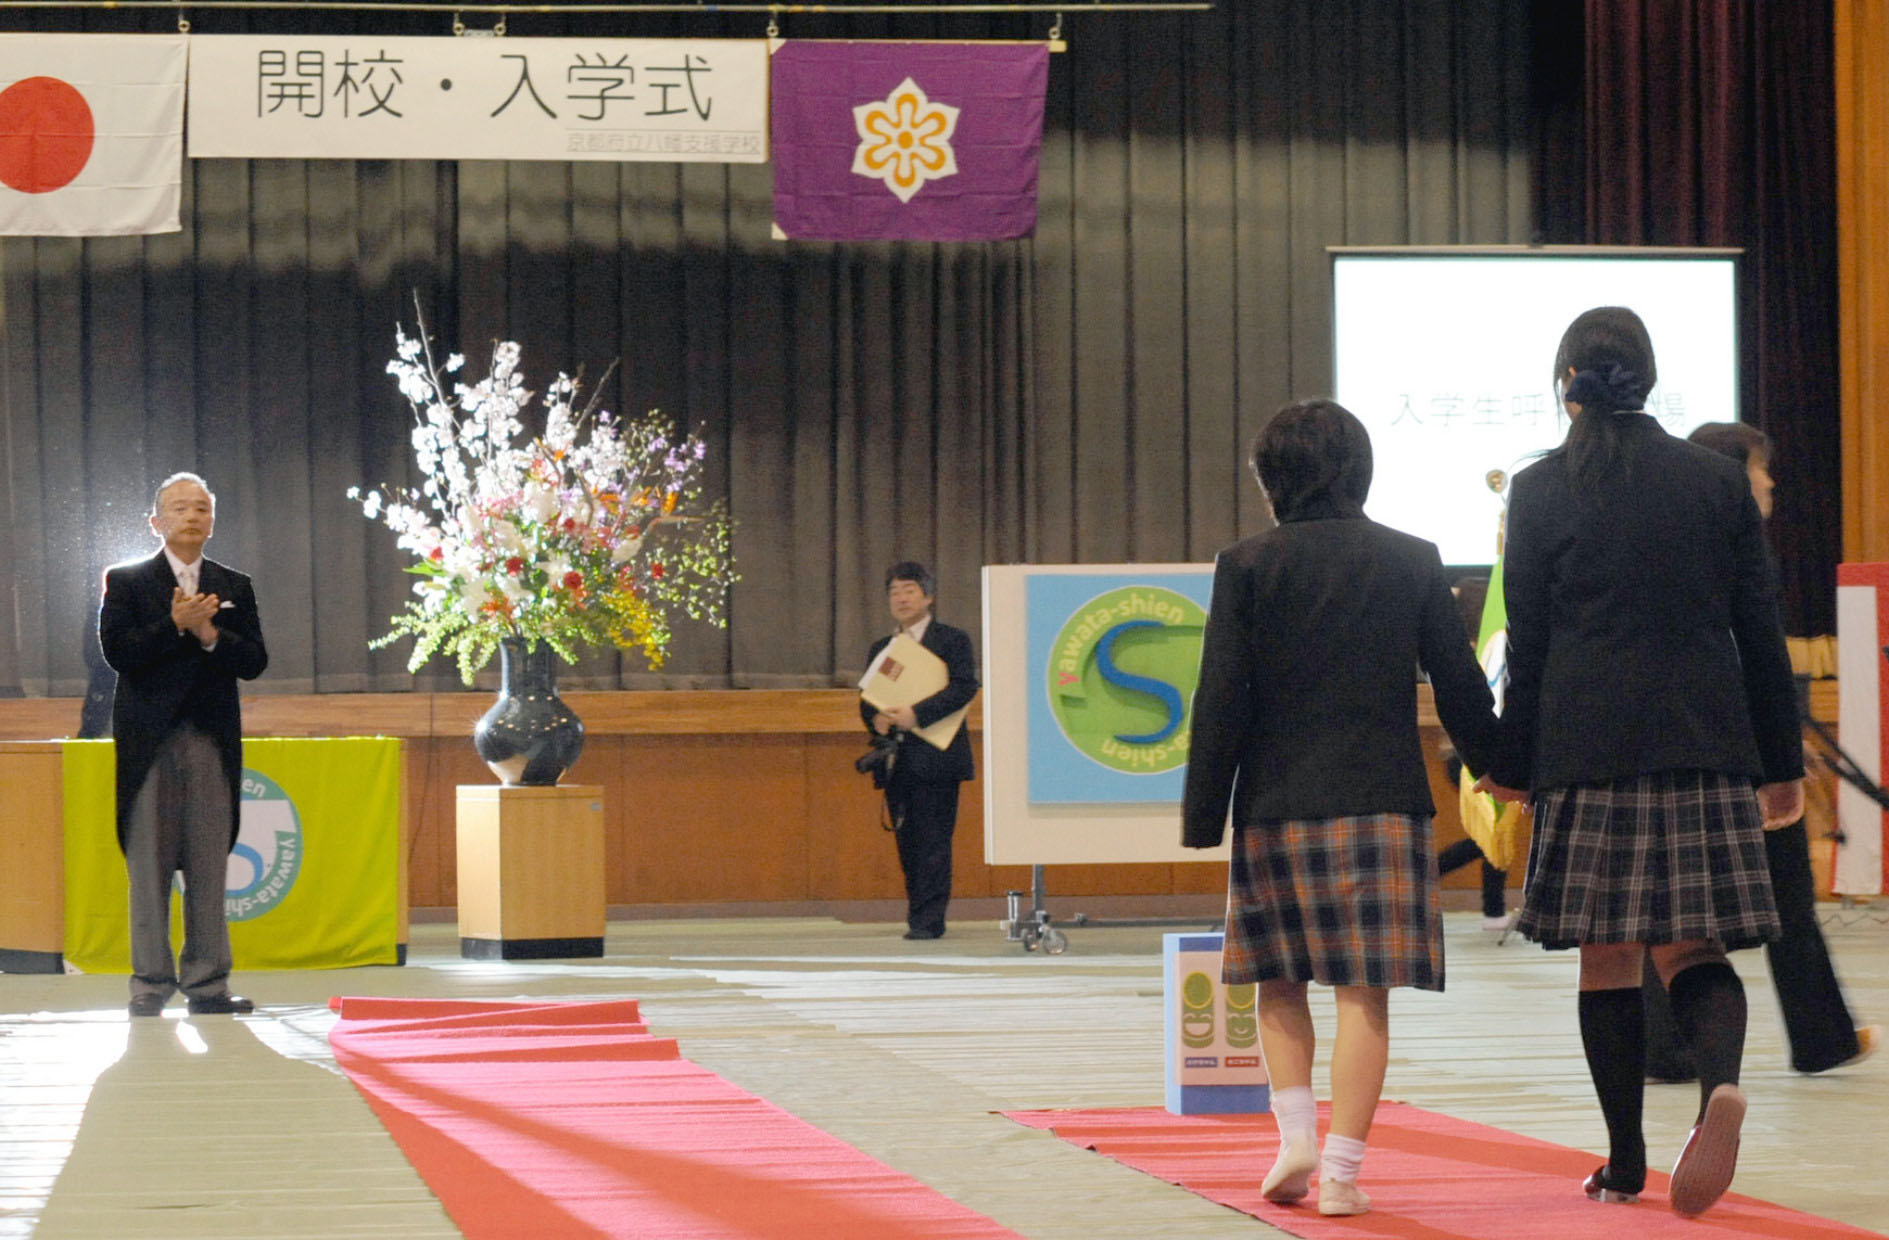 Pearly gates: A high school entrance ceremony heralds the end of the ordeal known as juken jigoku, or entrance-exam hell. | KYODO